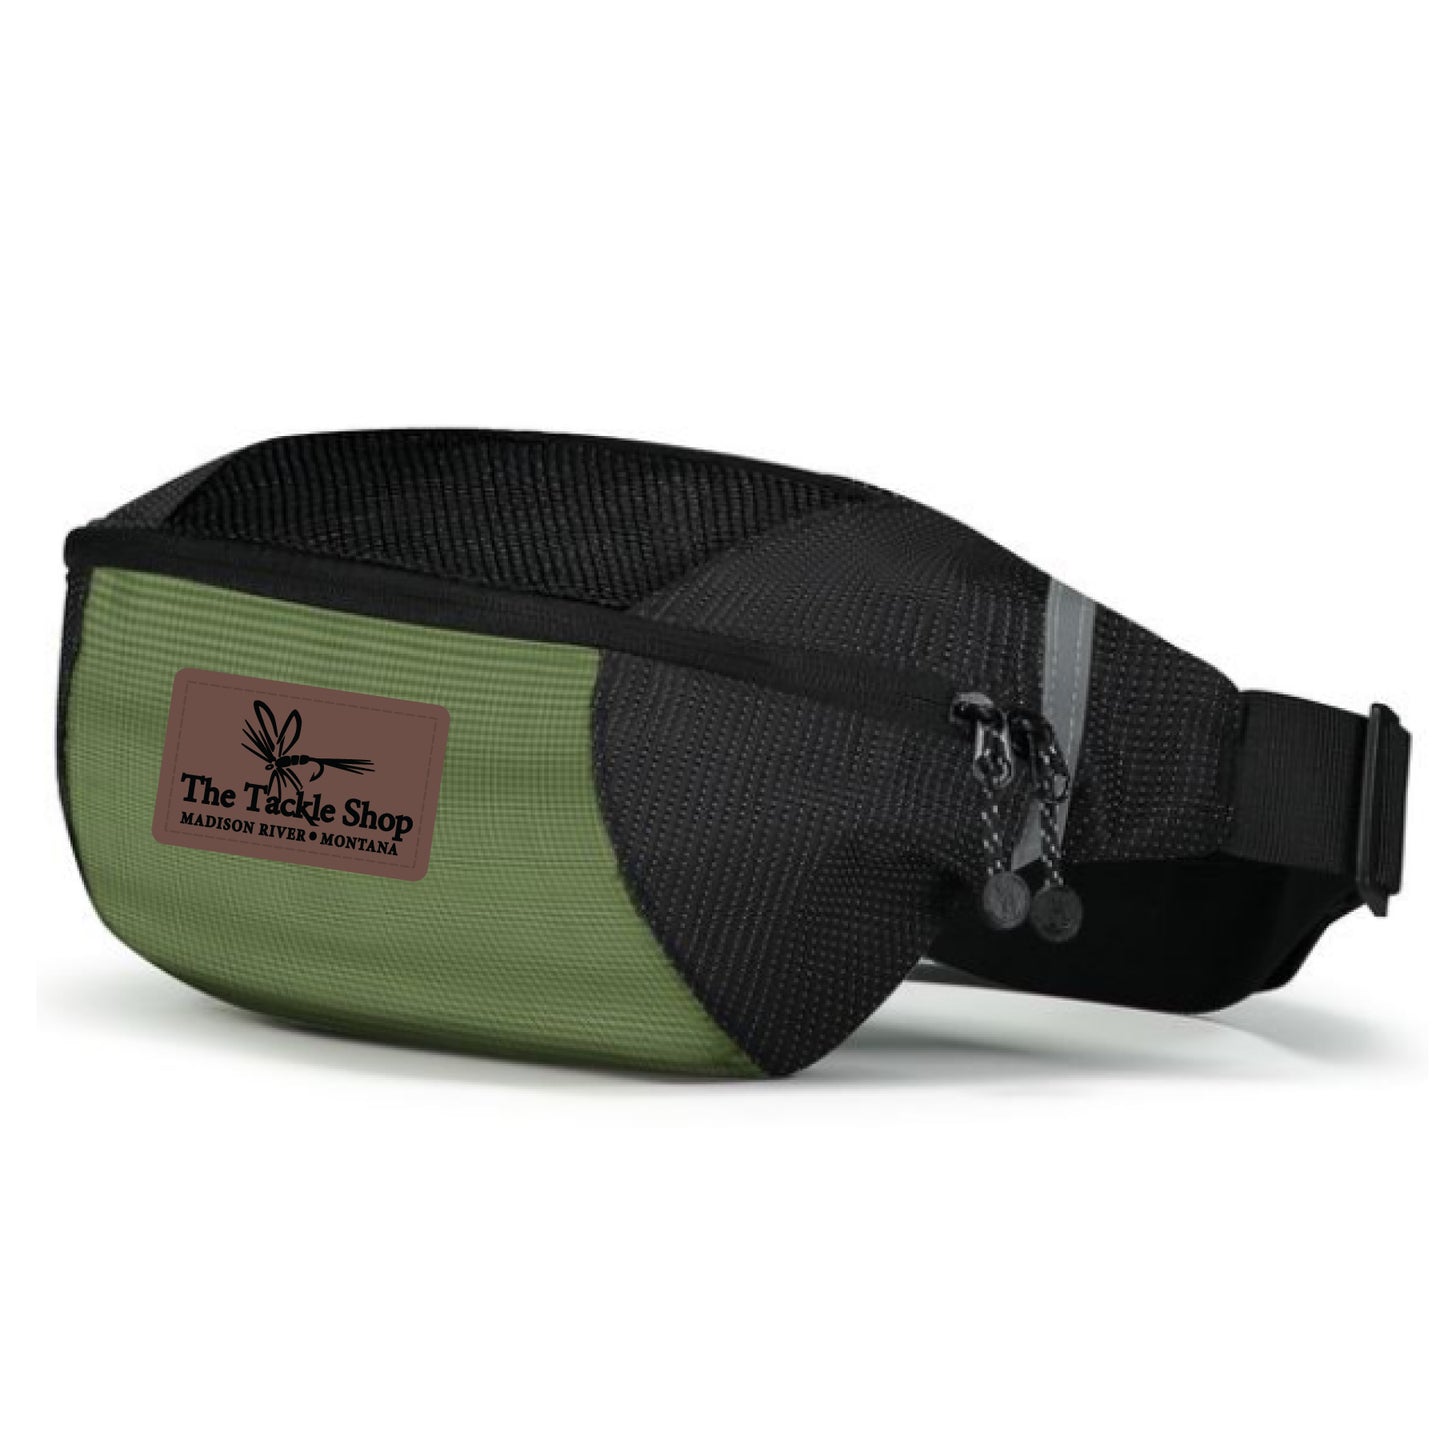 Ouray Expedition Waist Pack